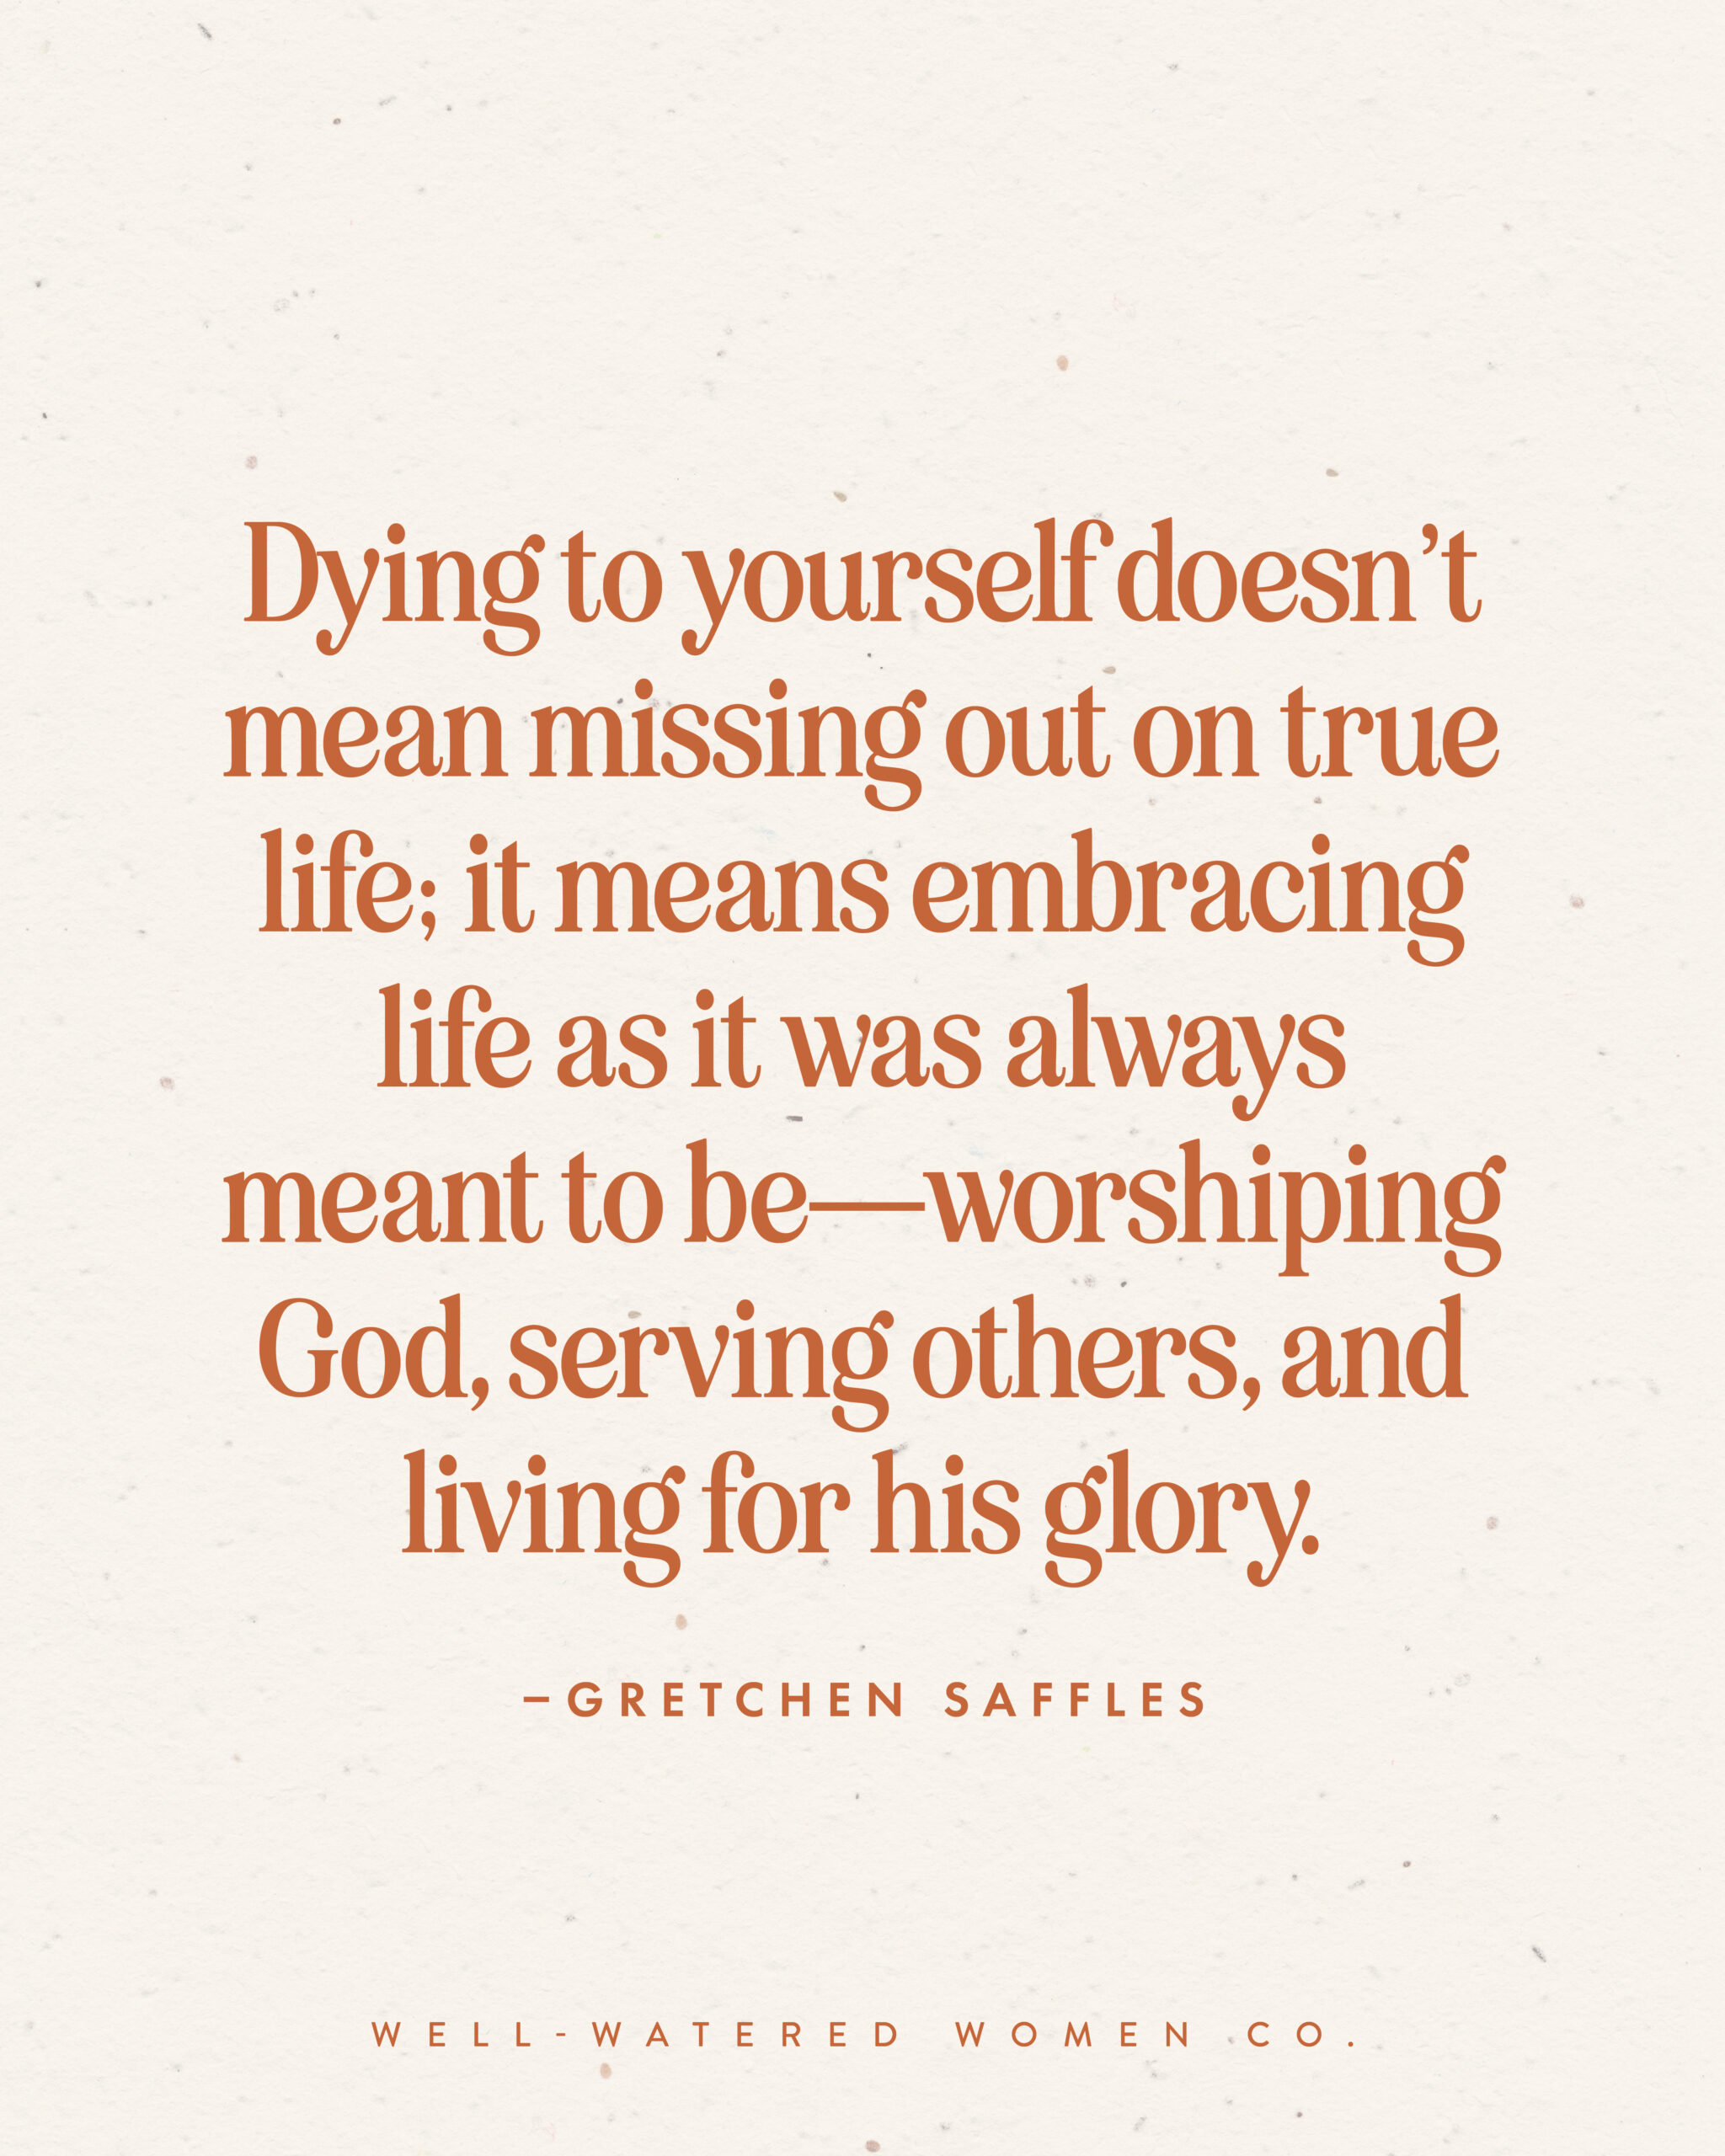 Dying to Live - an article from Well-Watered Women - quote